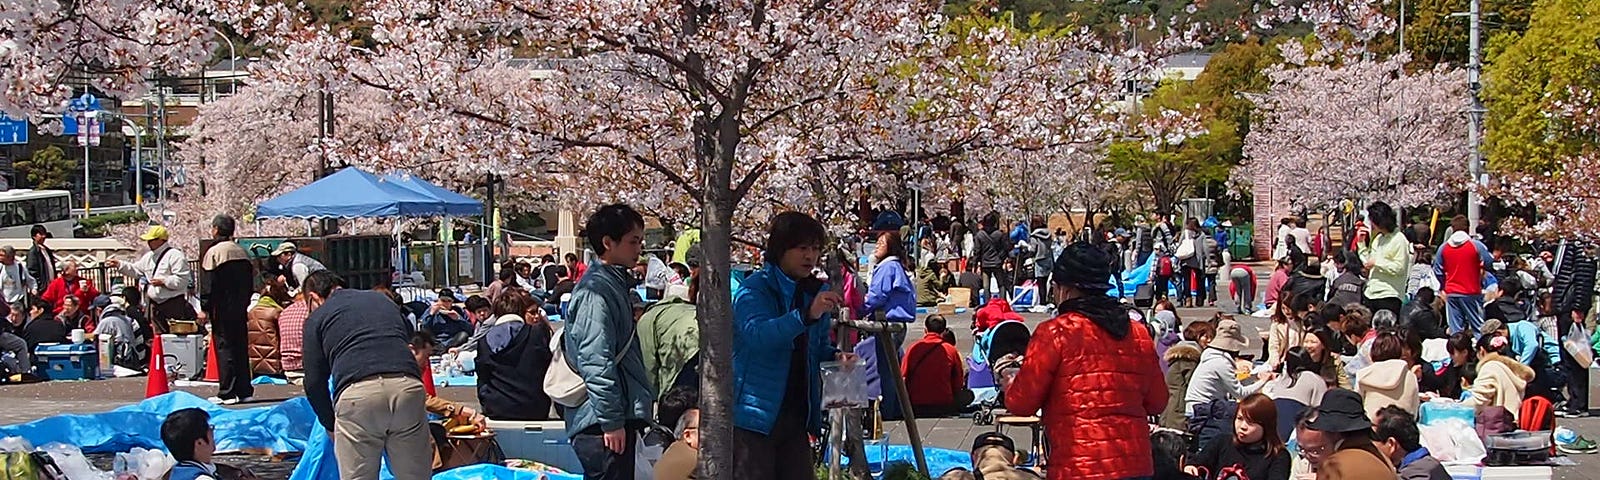 Japanese people sitting on tarps, socializing under blooming cherry trees